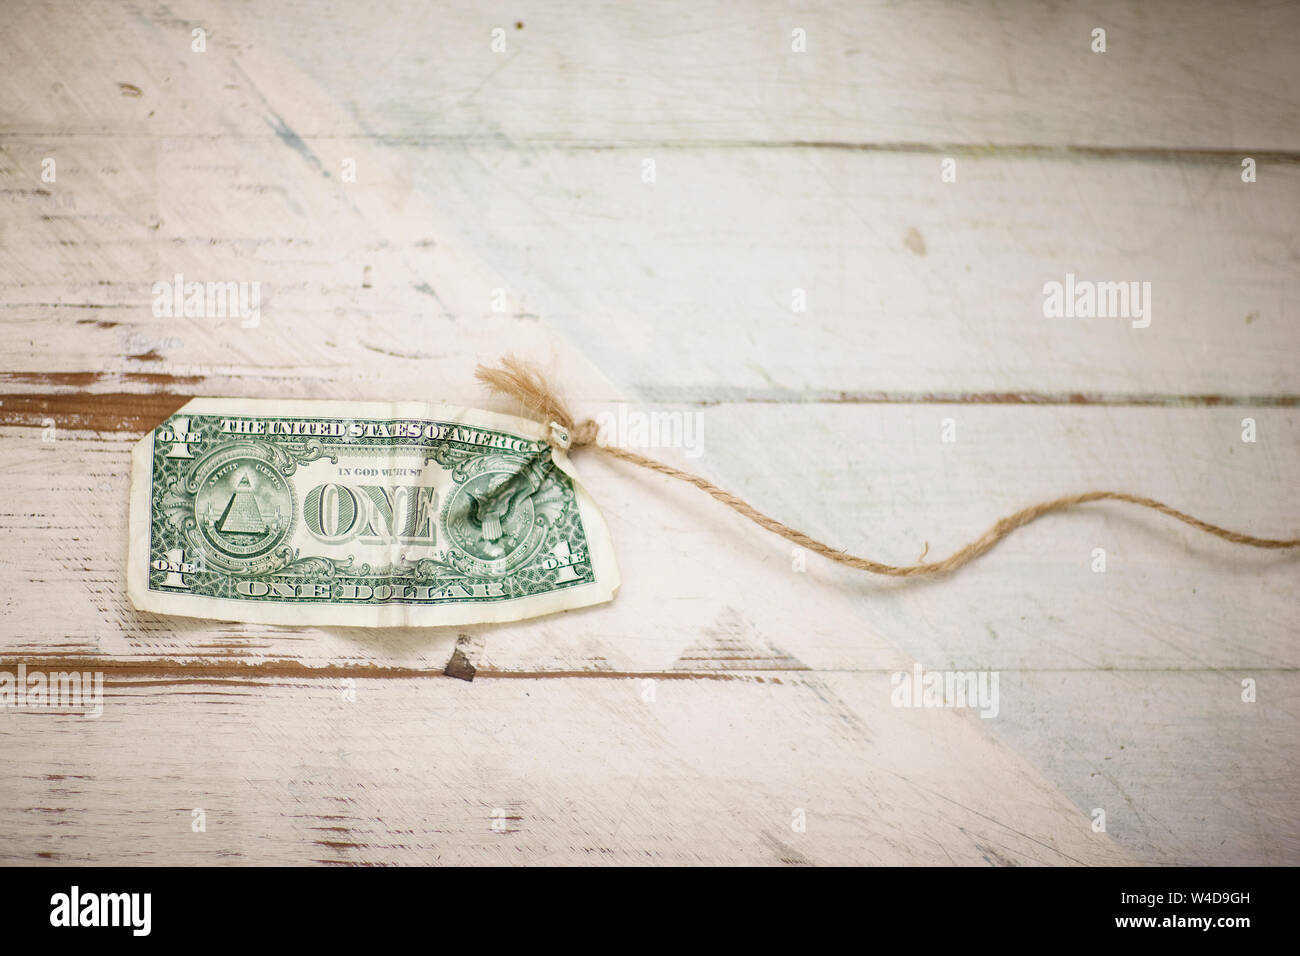 American dollar bill tied to the end of a piece of string. Stock Photo